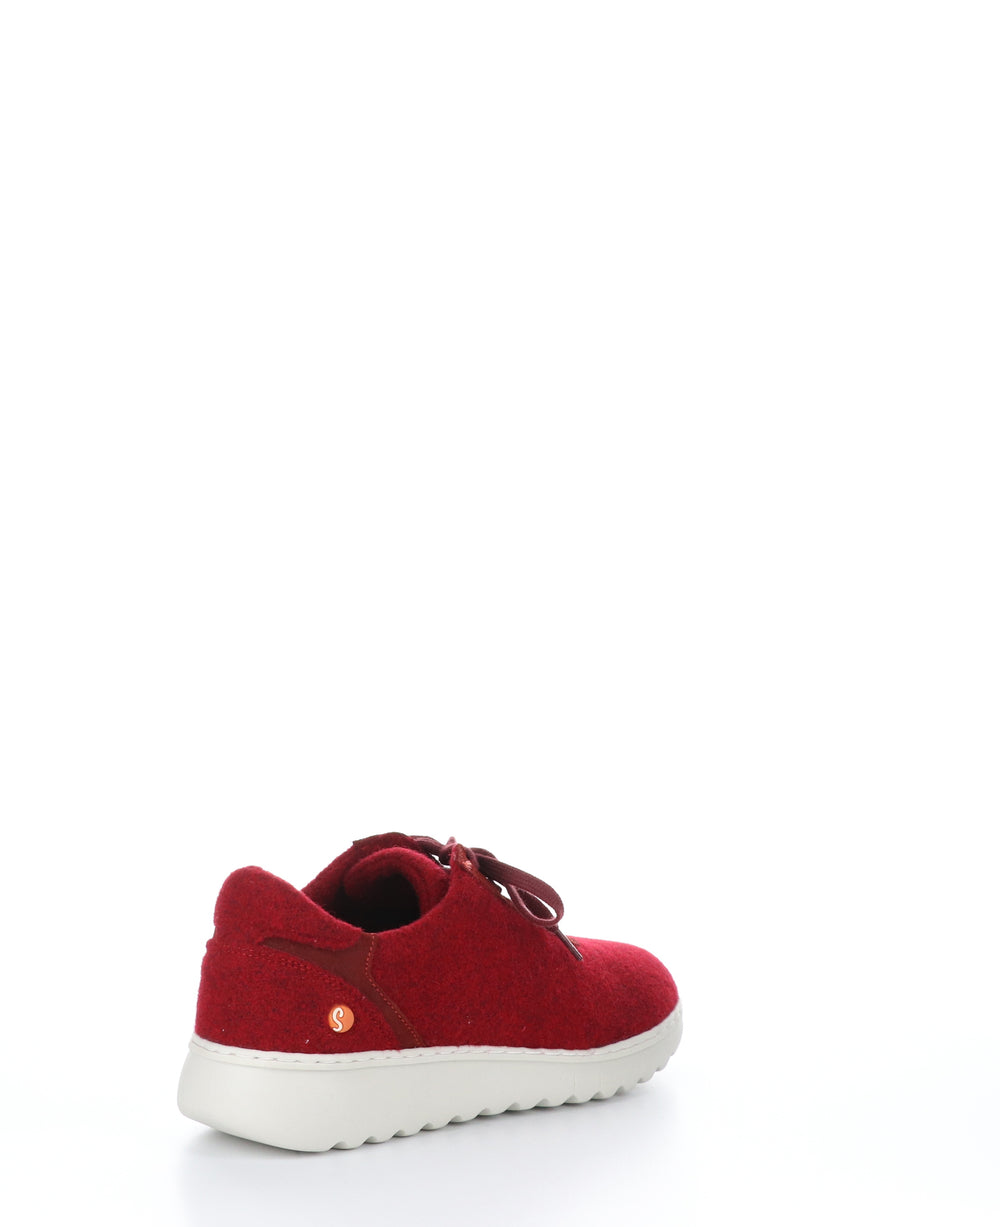 ELRA670SOF Red Round Toe Shoes|ELRA670SOF Chaussures à Bout Rond in Rouge